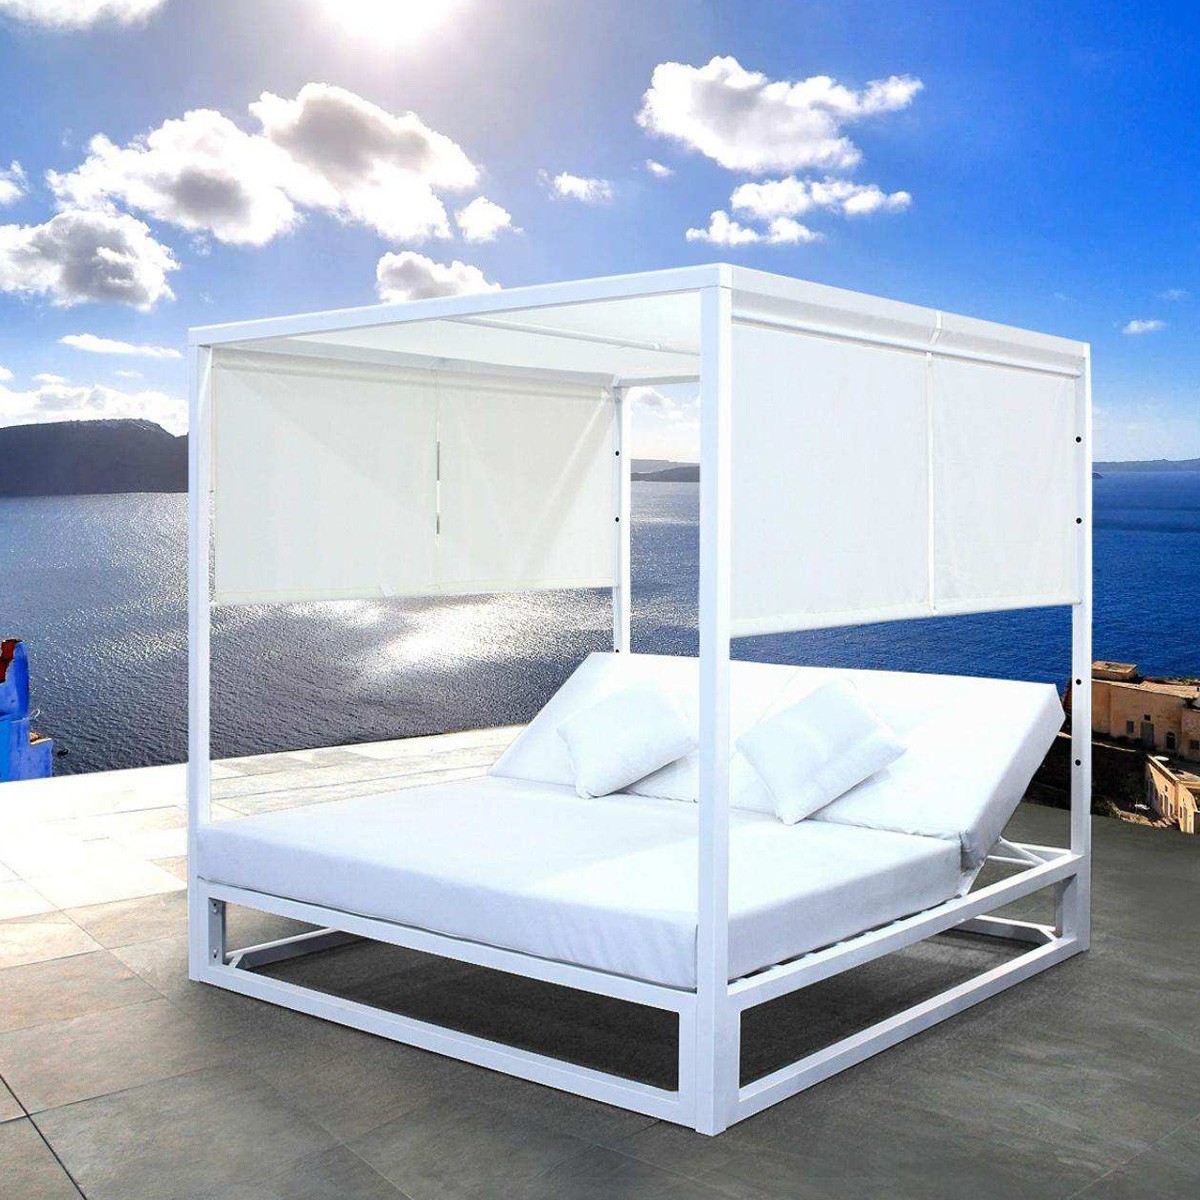 Daybed Concepto